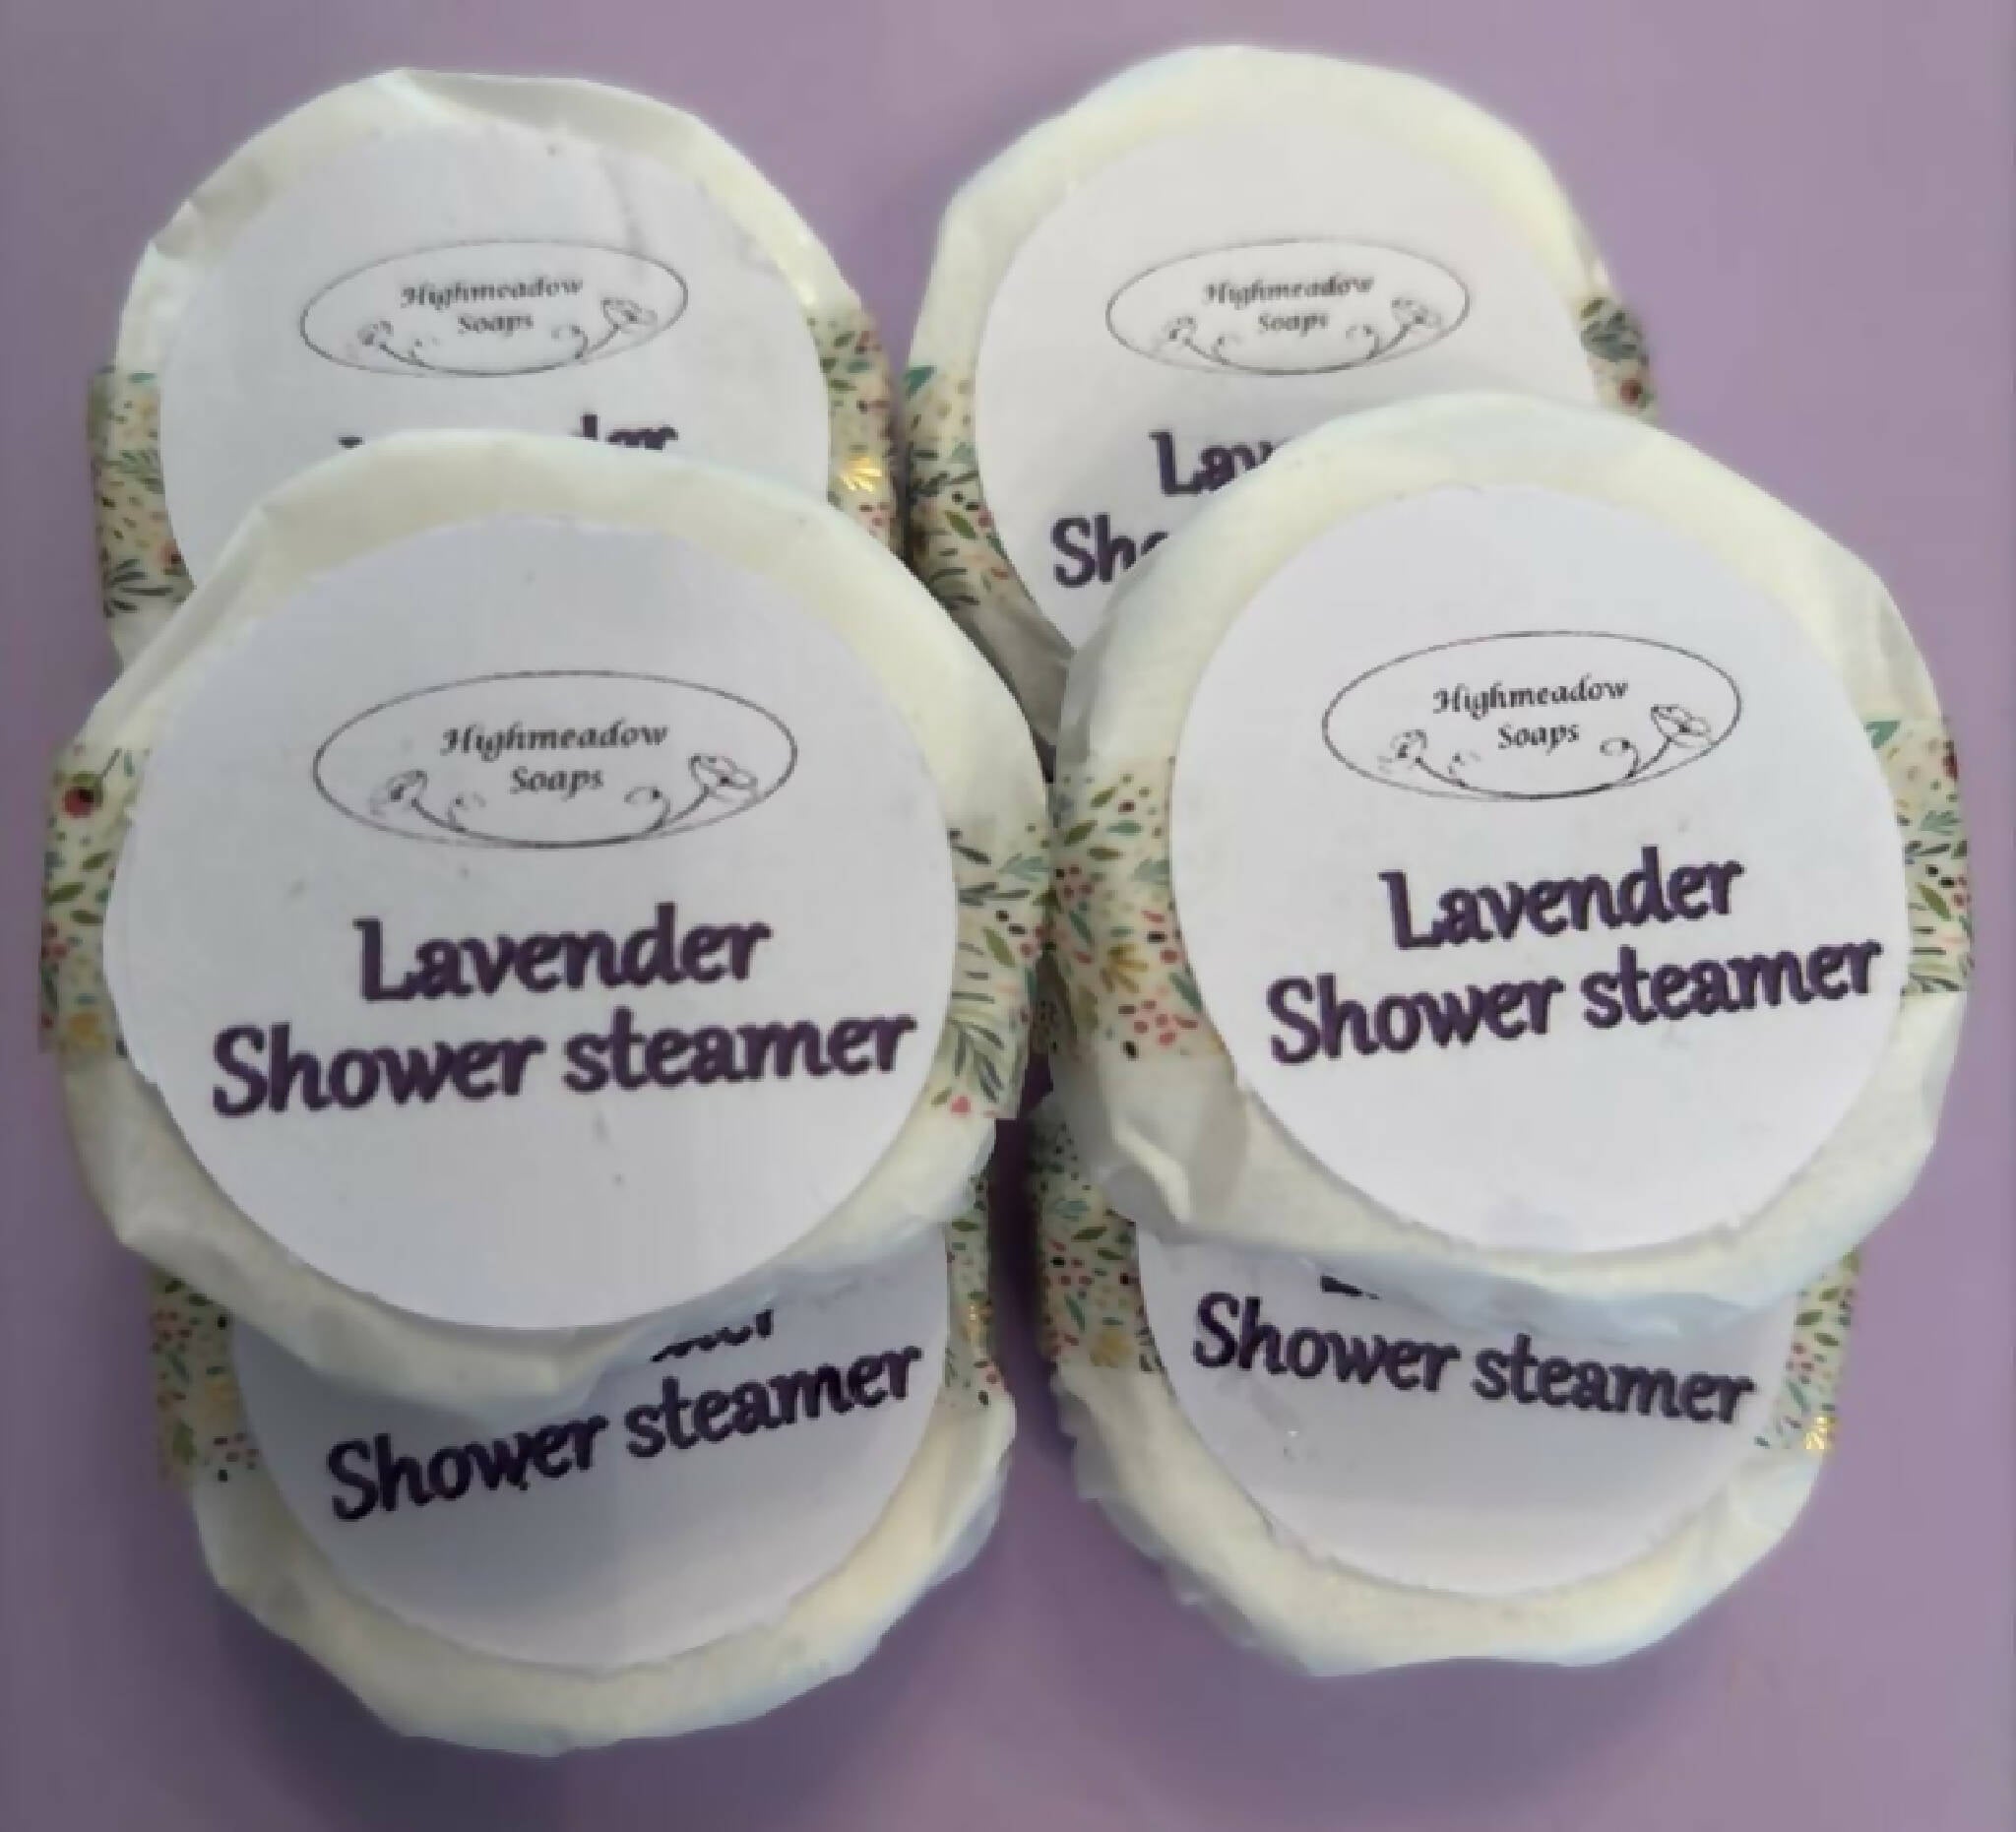 Shower Steamers with Lavender essential oil